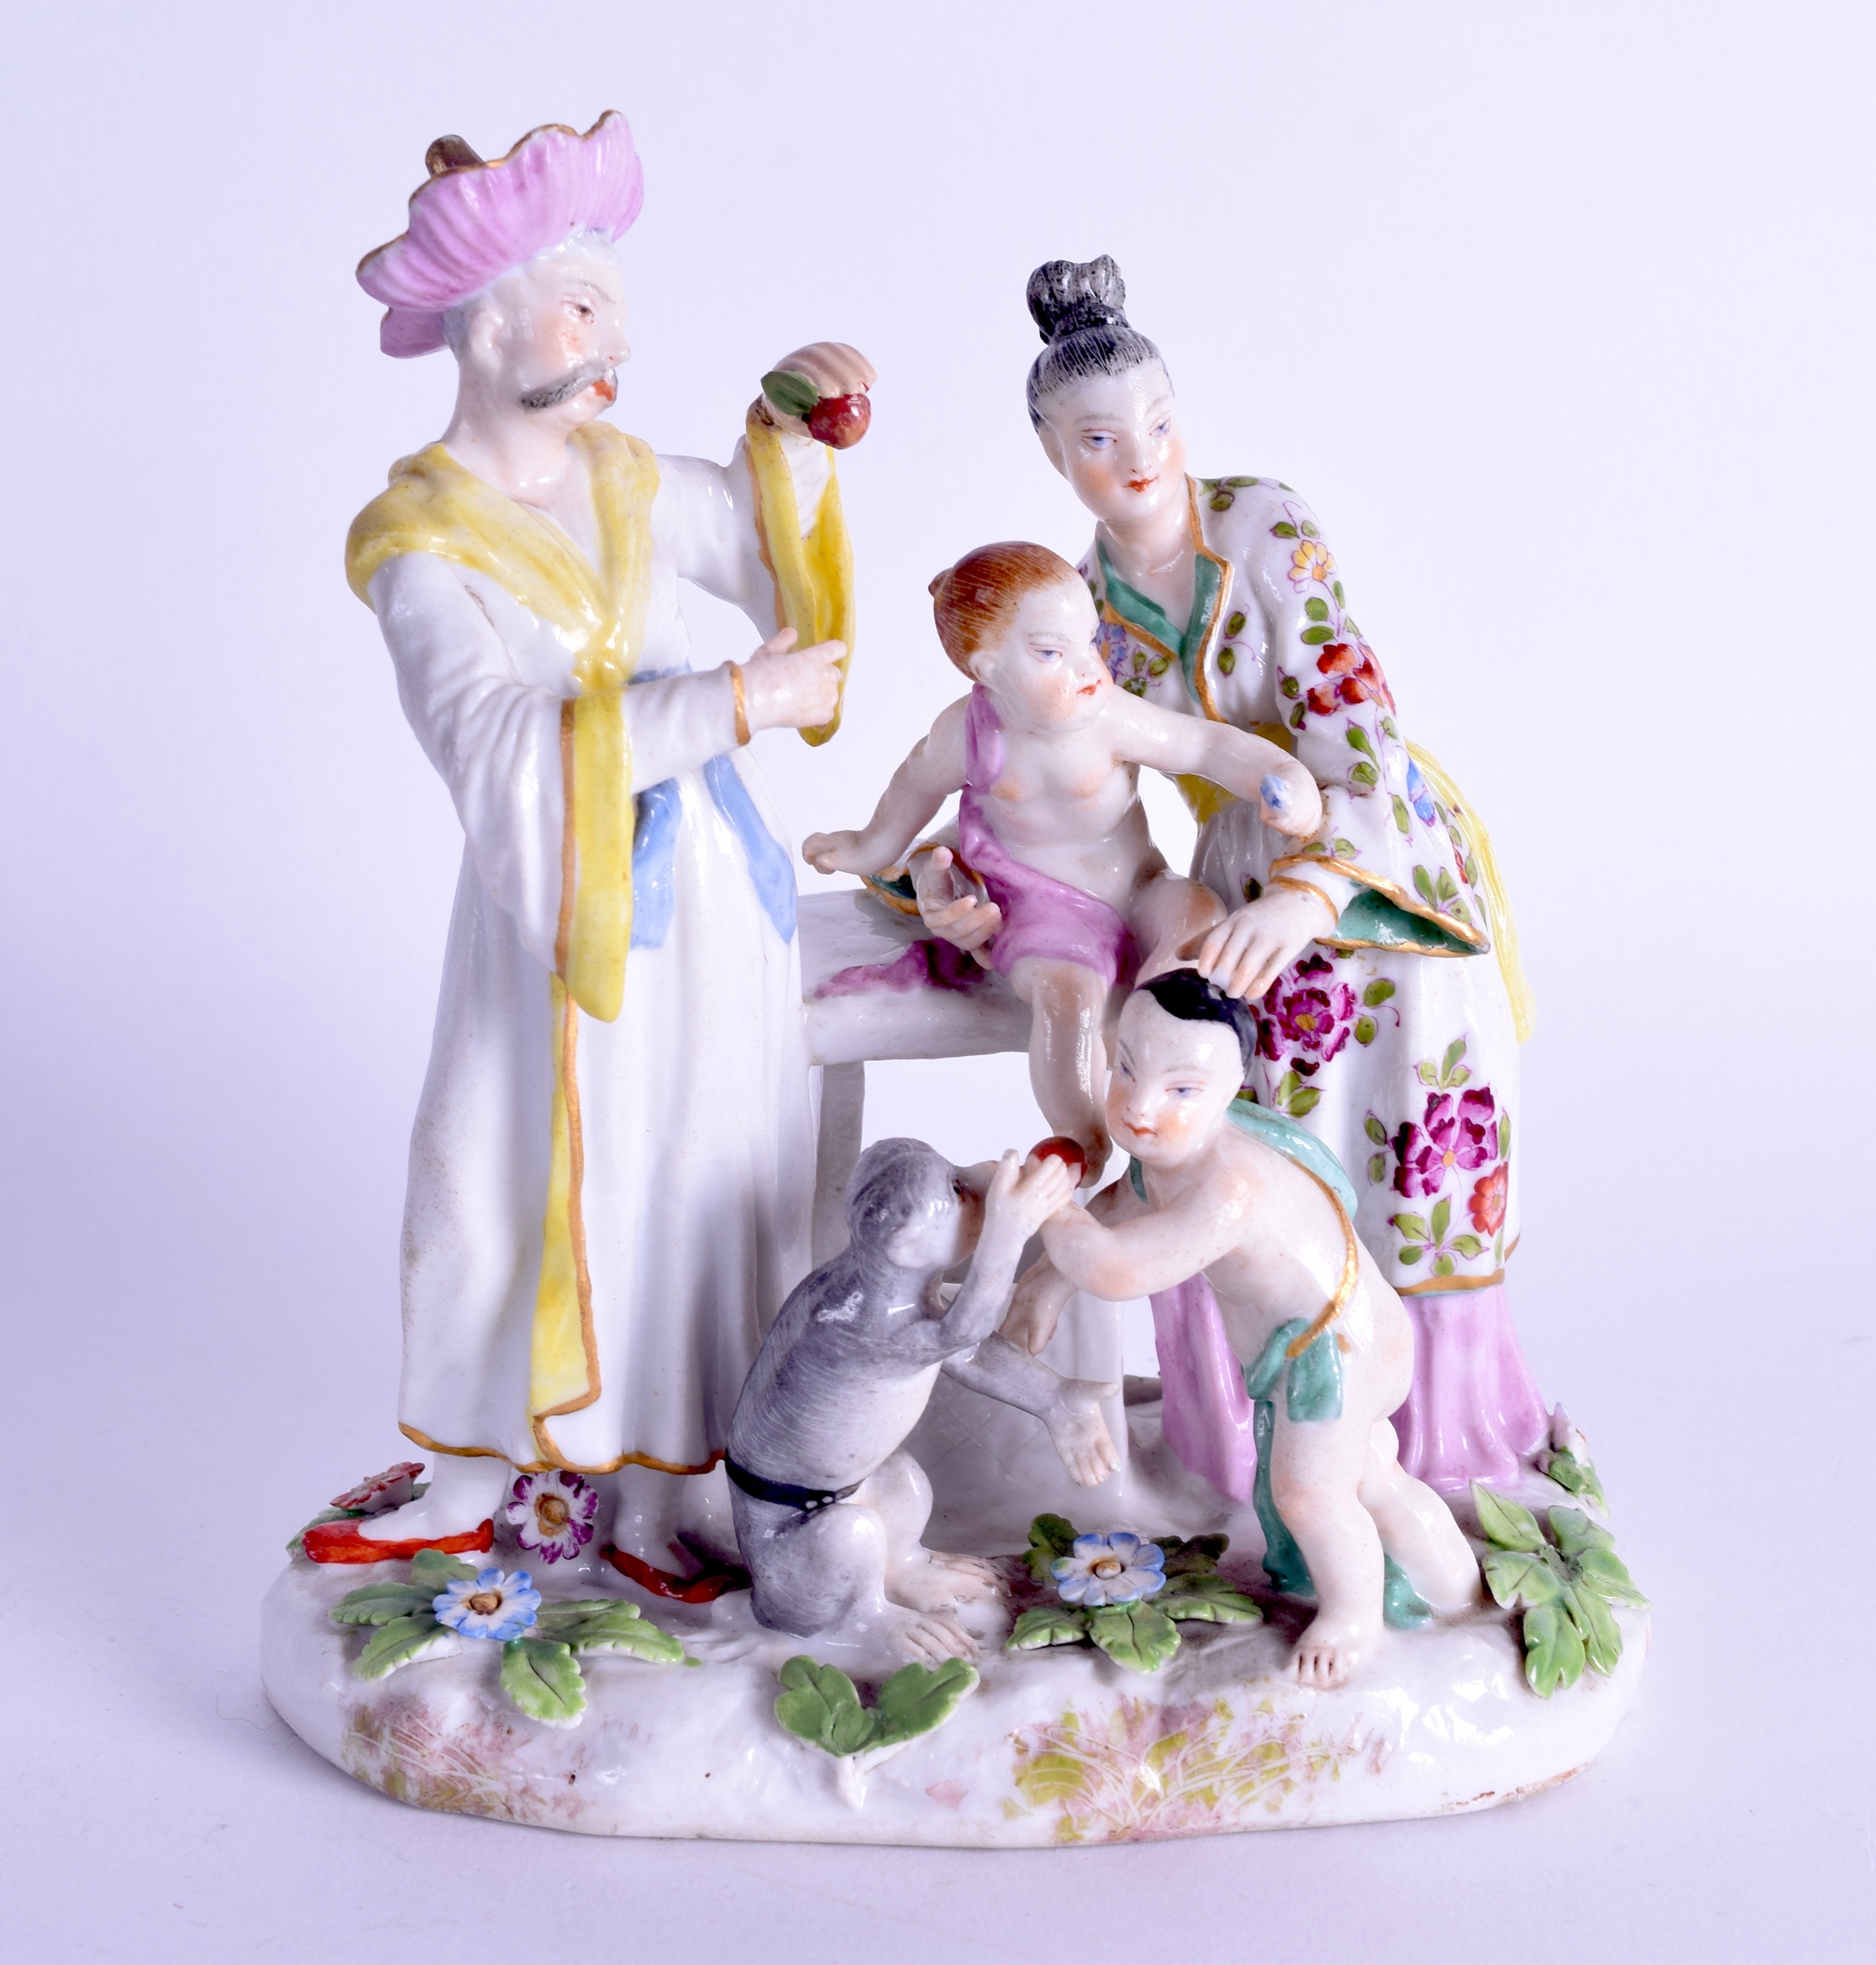 AN 18TH/19TH CENTURY GERMAN PORCELAIN FIGURAL GROUP probably Sitzendorf, modelled as Chinese figures